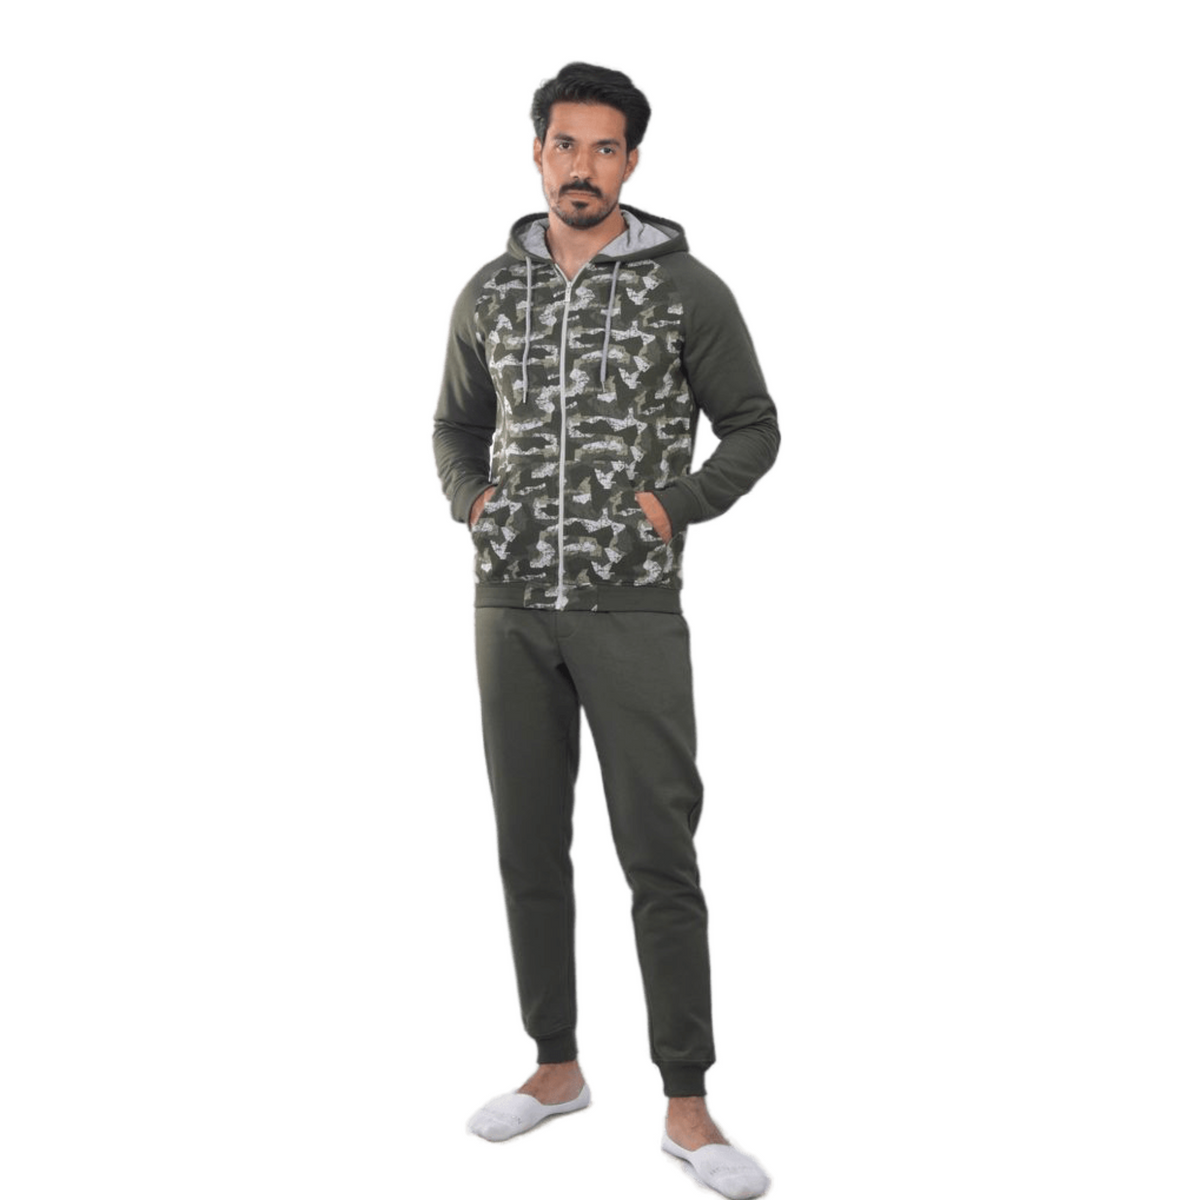 Men's Camo Green Winter Hoodie and Sweatpants Set - Stay Warm and Fashionable.